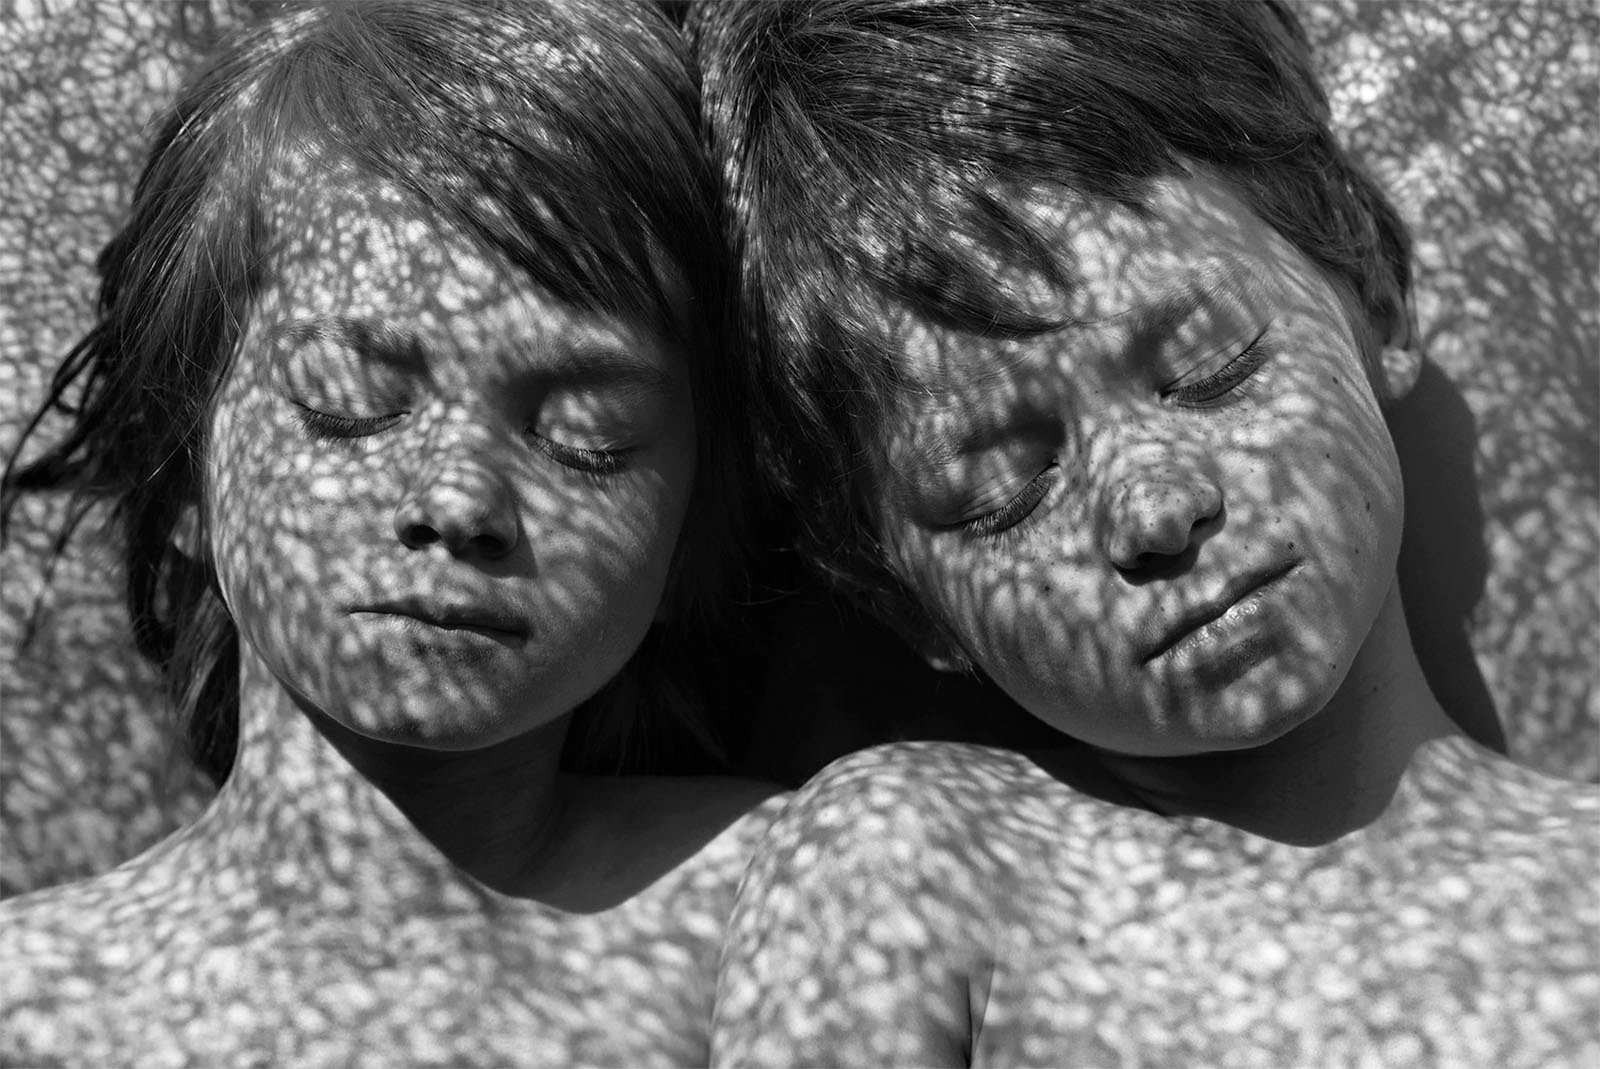 Black and white photograph of two children lying side by side with closed eyes. Dappled light filters through a textured surface above them, casting intricate shadows on their faces and bodies. Their expressions are peaceful and relaxed.